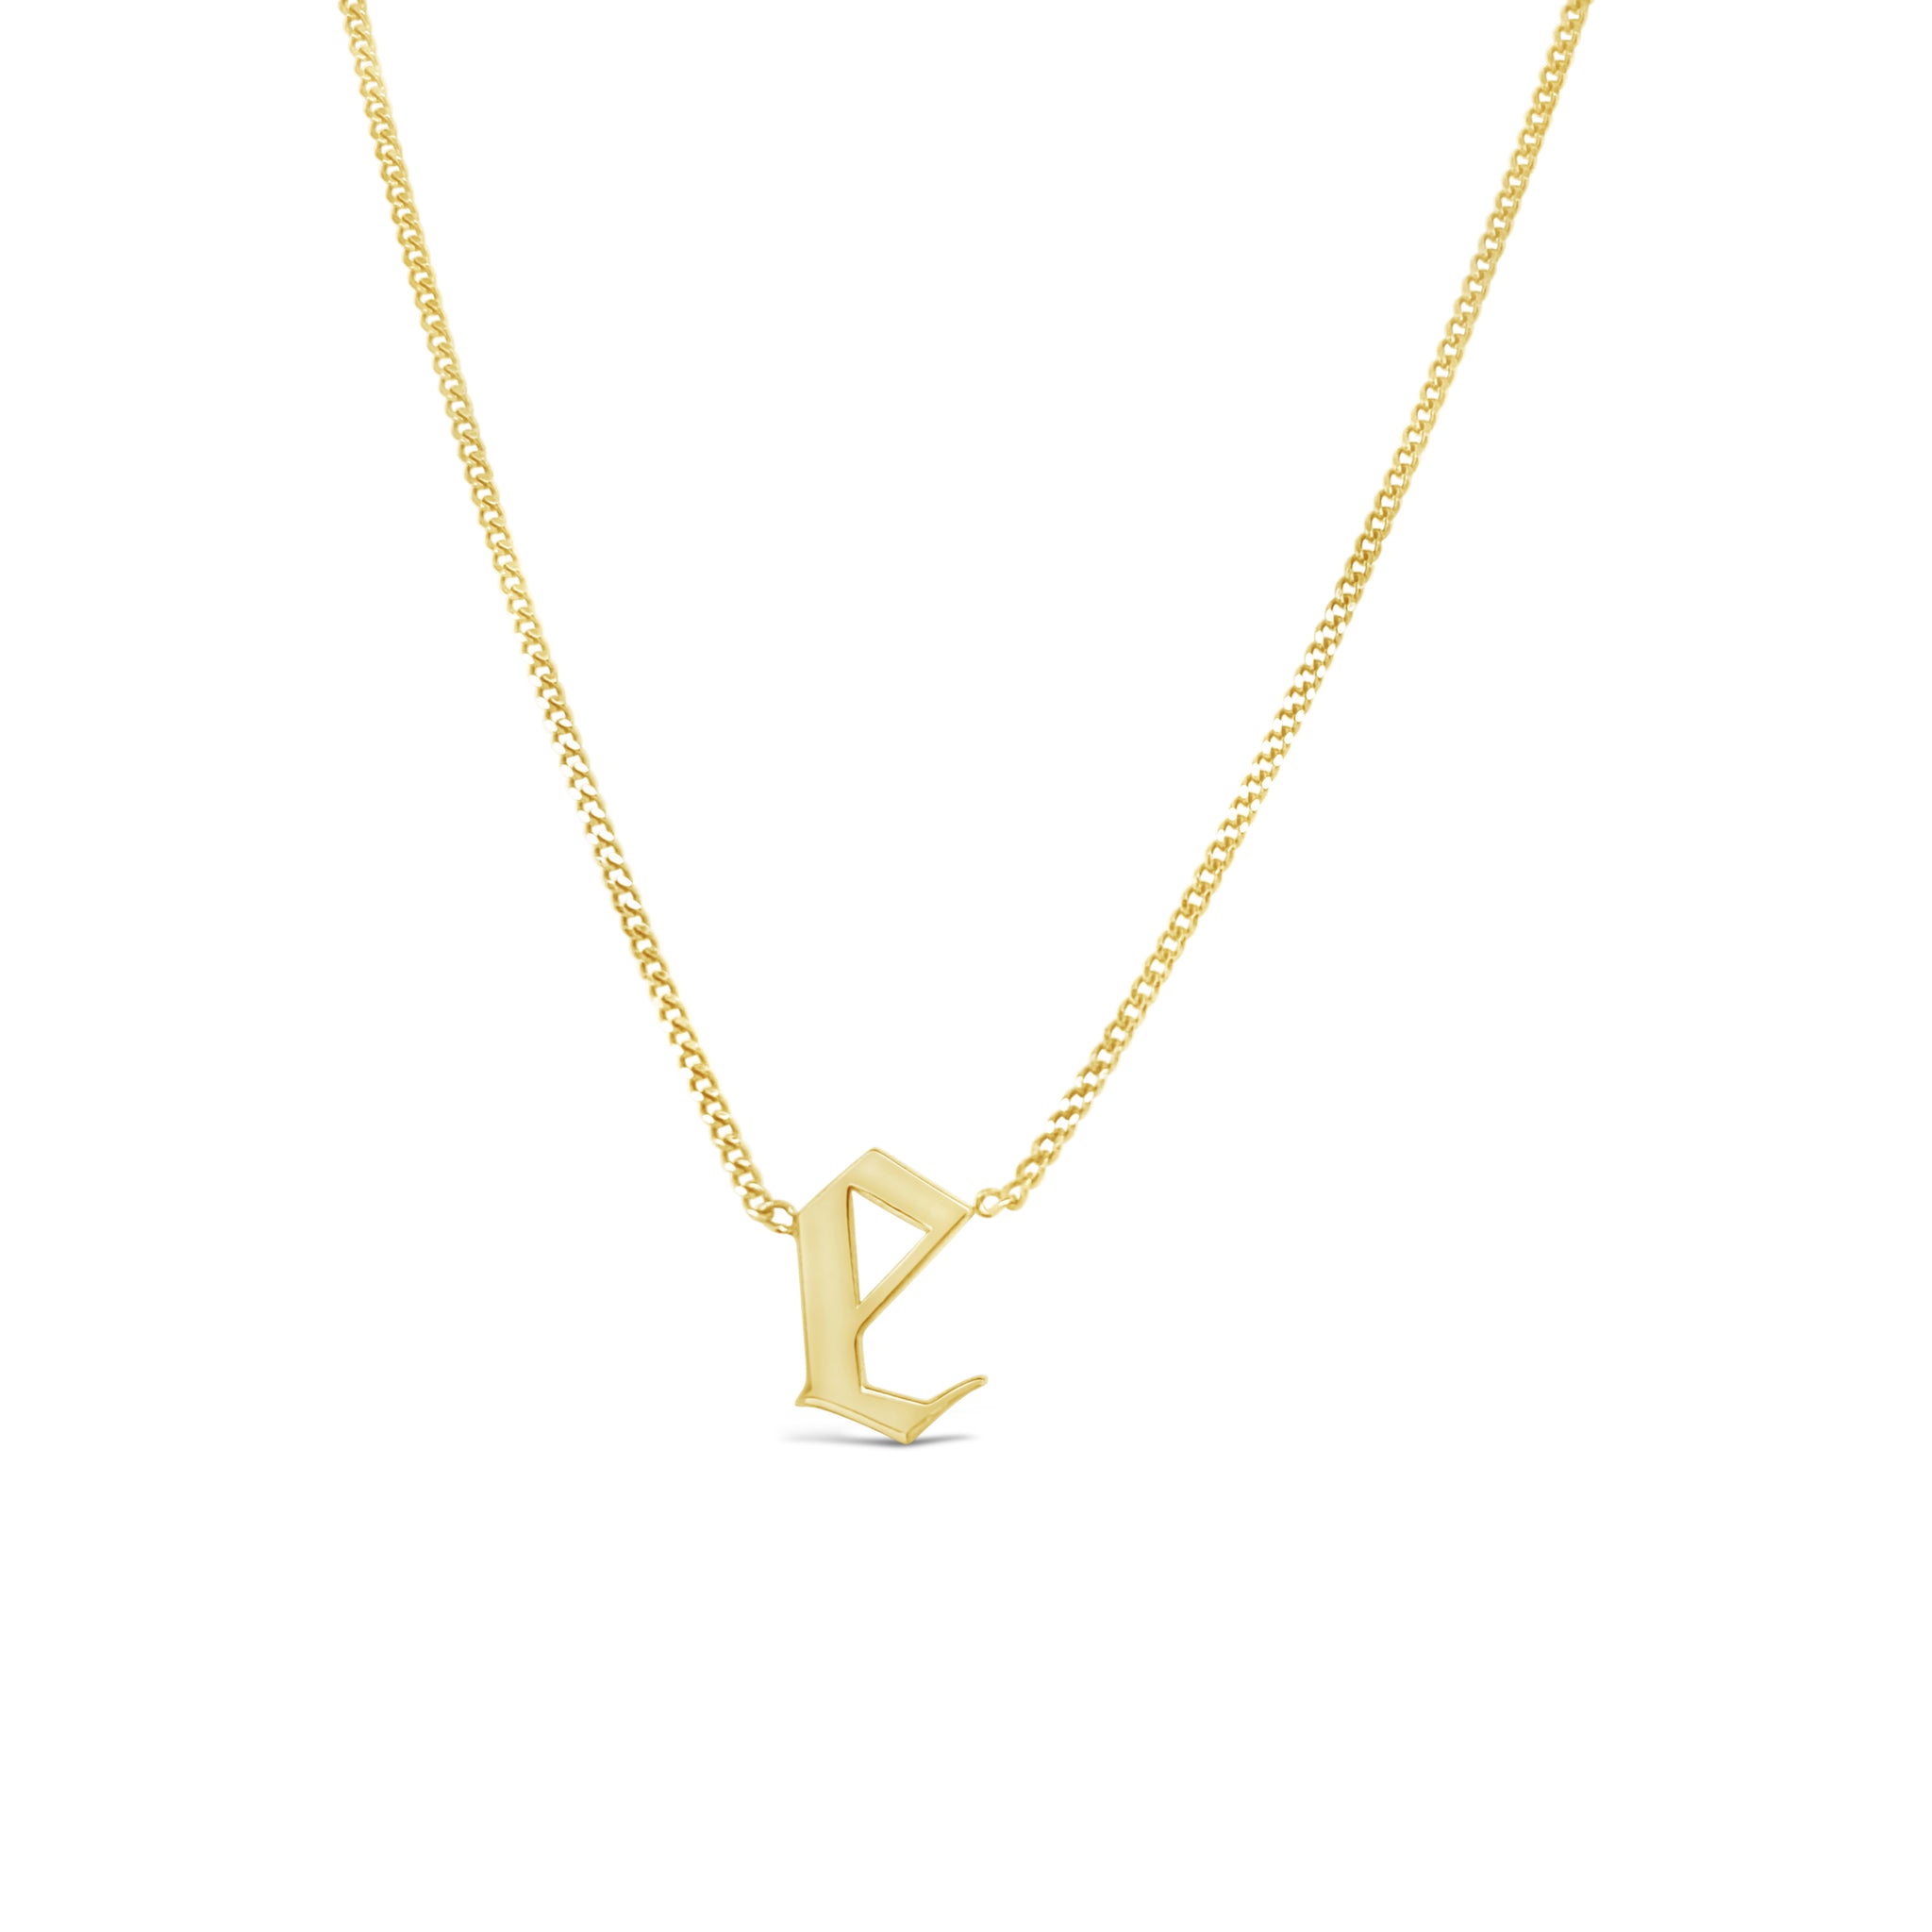 Gothic Initial Necklace in 18K Gold Vermeil - MYKA